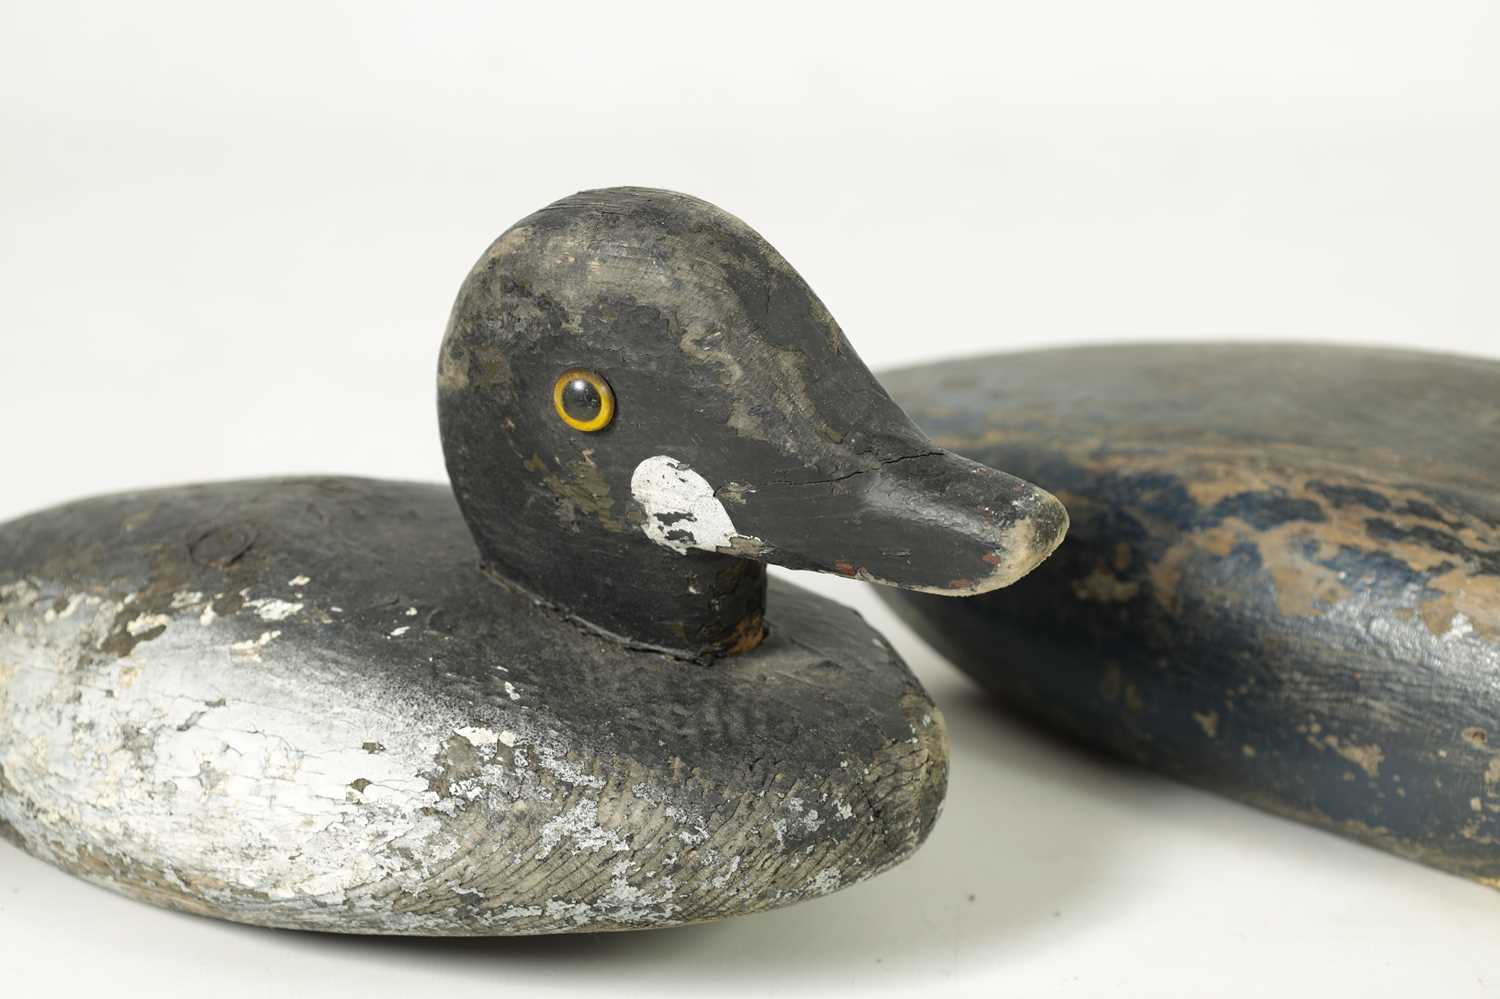 A COLLECTION OF SIX 19TH CENTURY PAINTED CARVED WOODEN DECOY DUCKS - Image 3 of 8